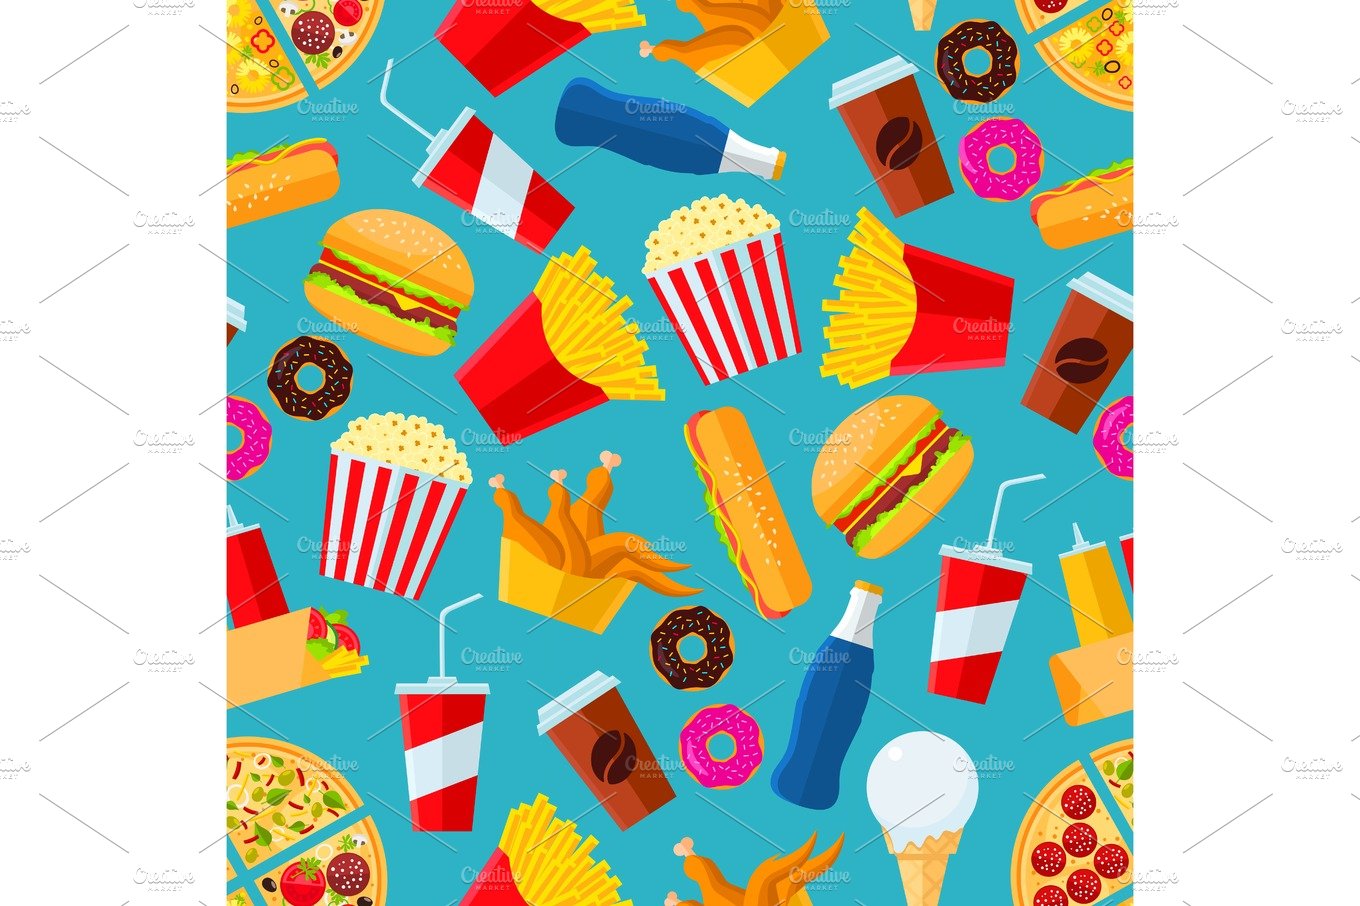 Fast food snacks and drinks seamless background cover image.